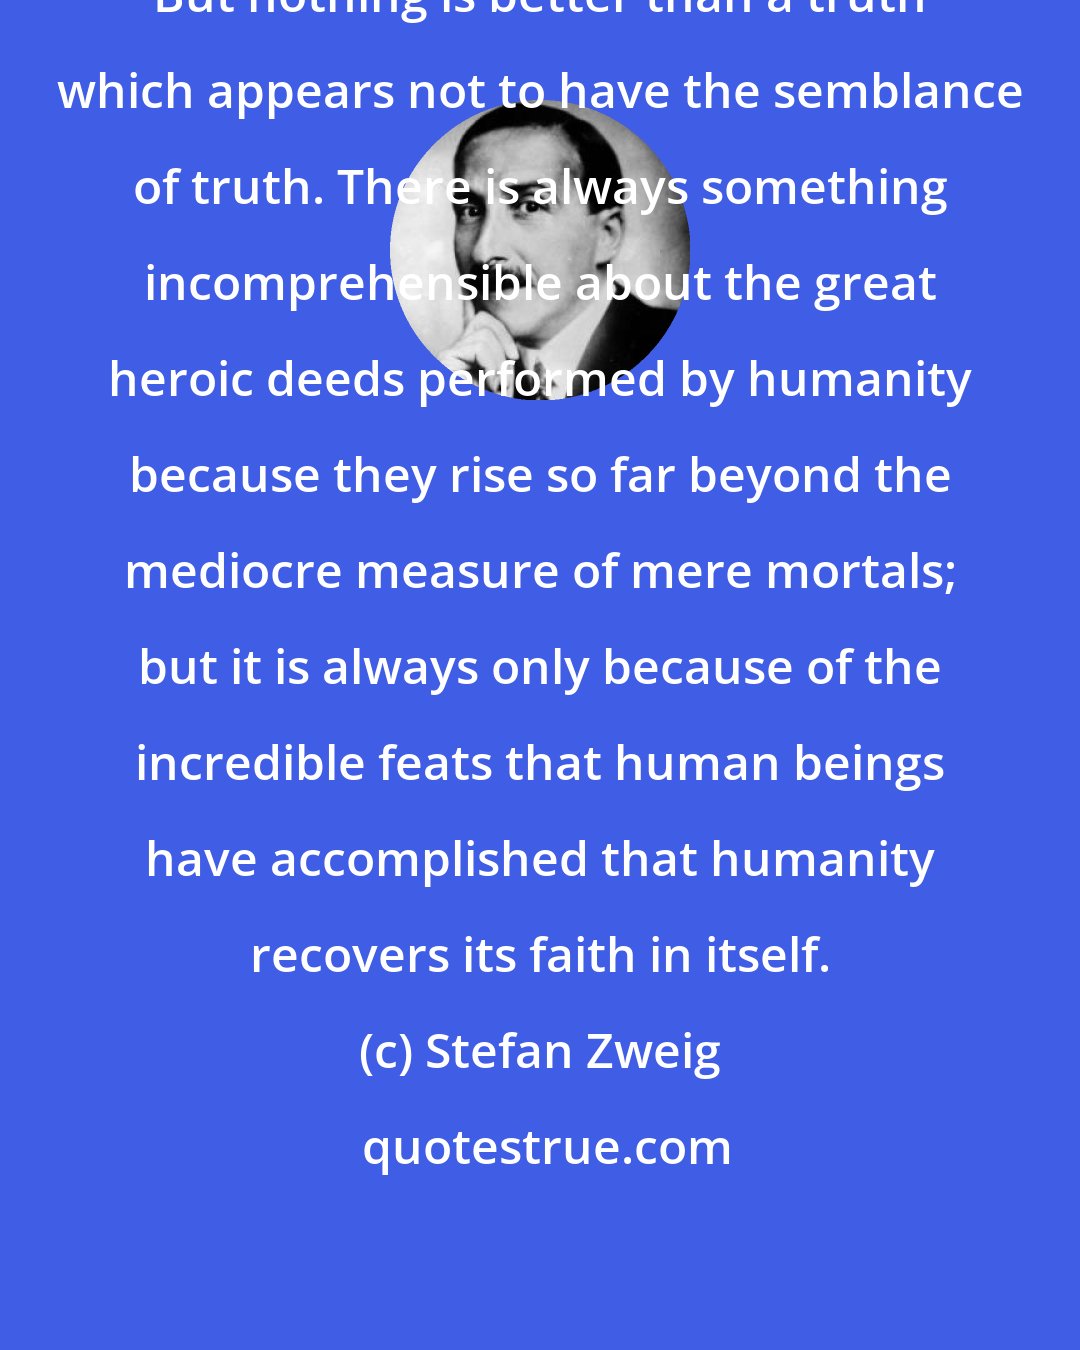 Stefan Zweig: But nothing is better than a truth which appears not to have the semblance of truth. There is always something incomprehensible about the great heroic deeds performed by humanity because they rise so far beyond the mediocre measure of mere mortals; but it is always only because of the incredible feats that human beings have accomplished that humanity recovers its faith in itself.